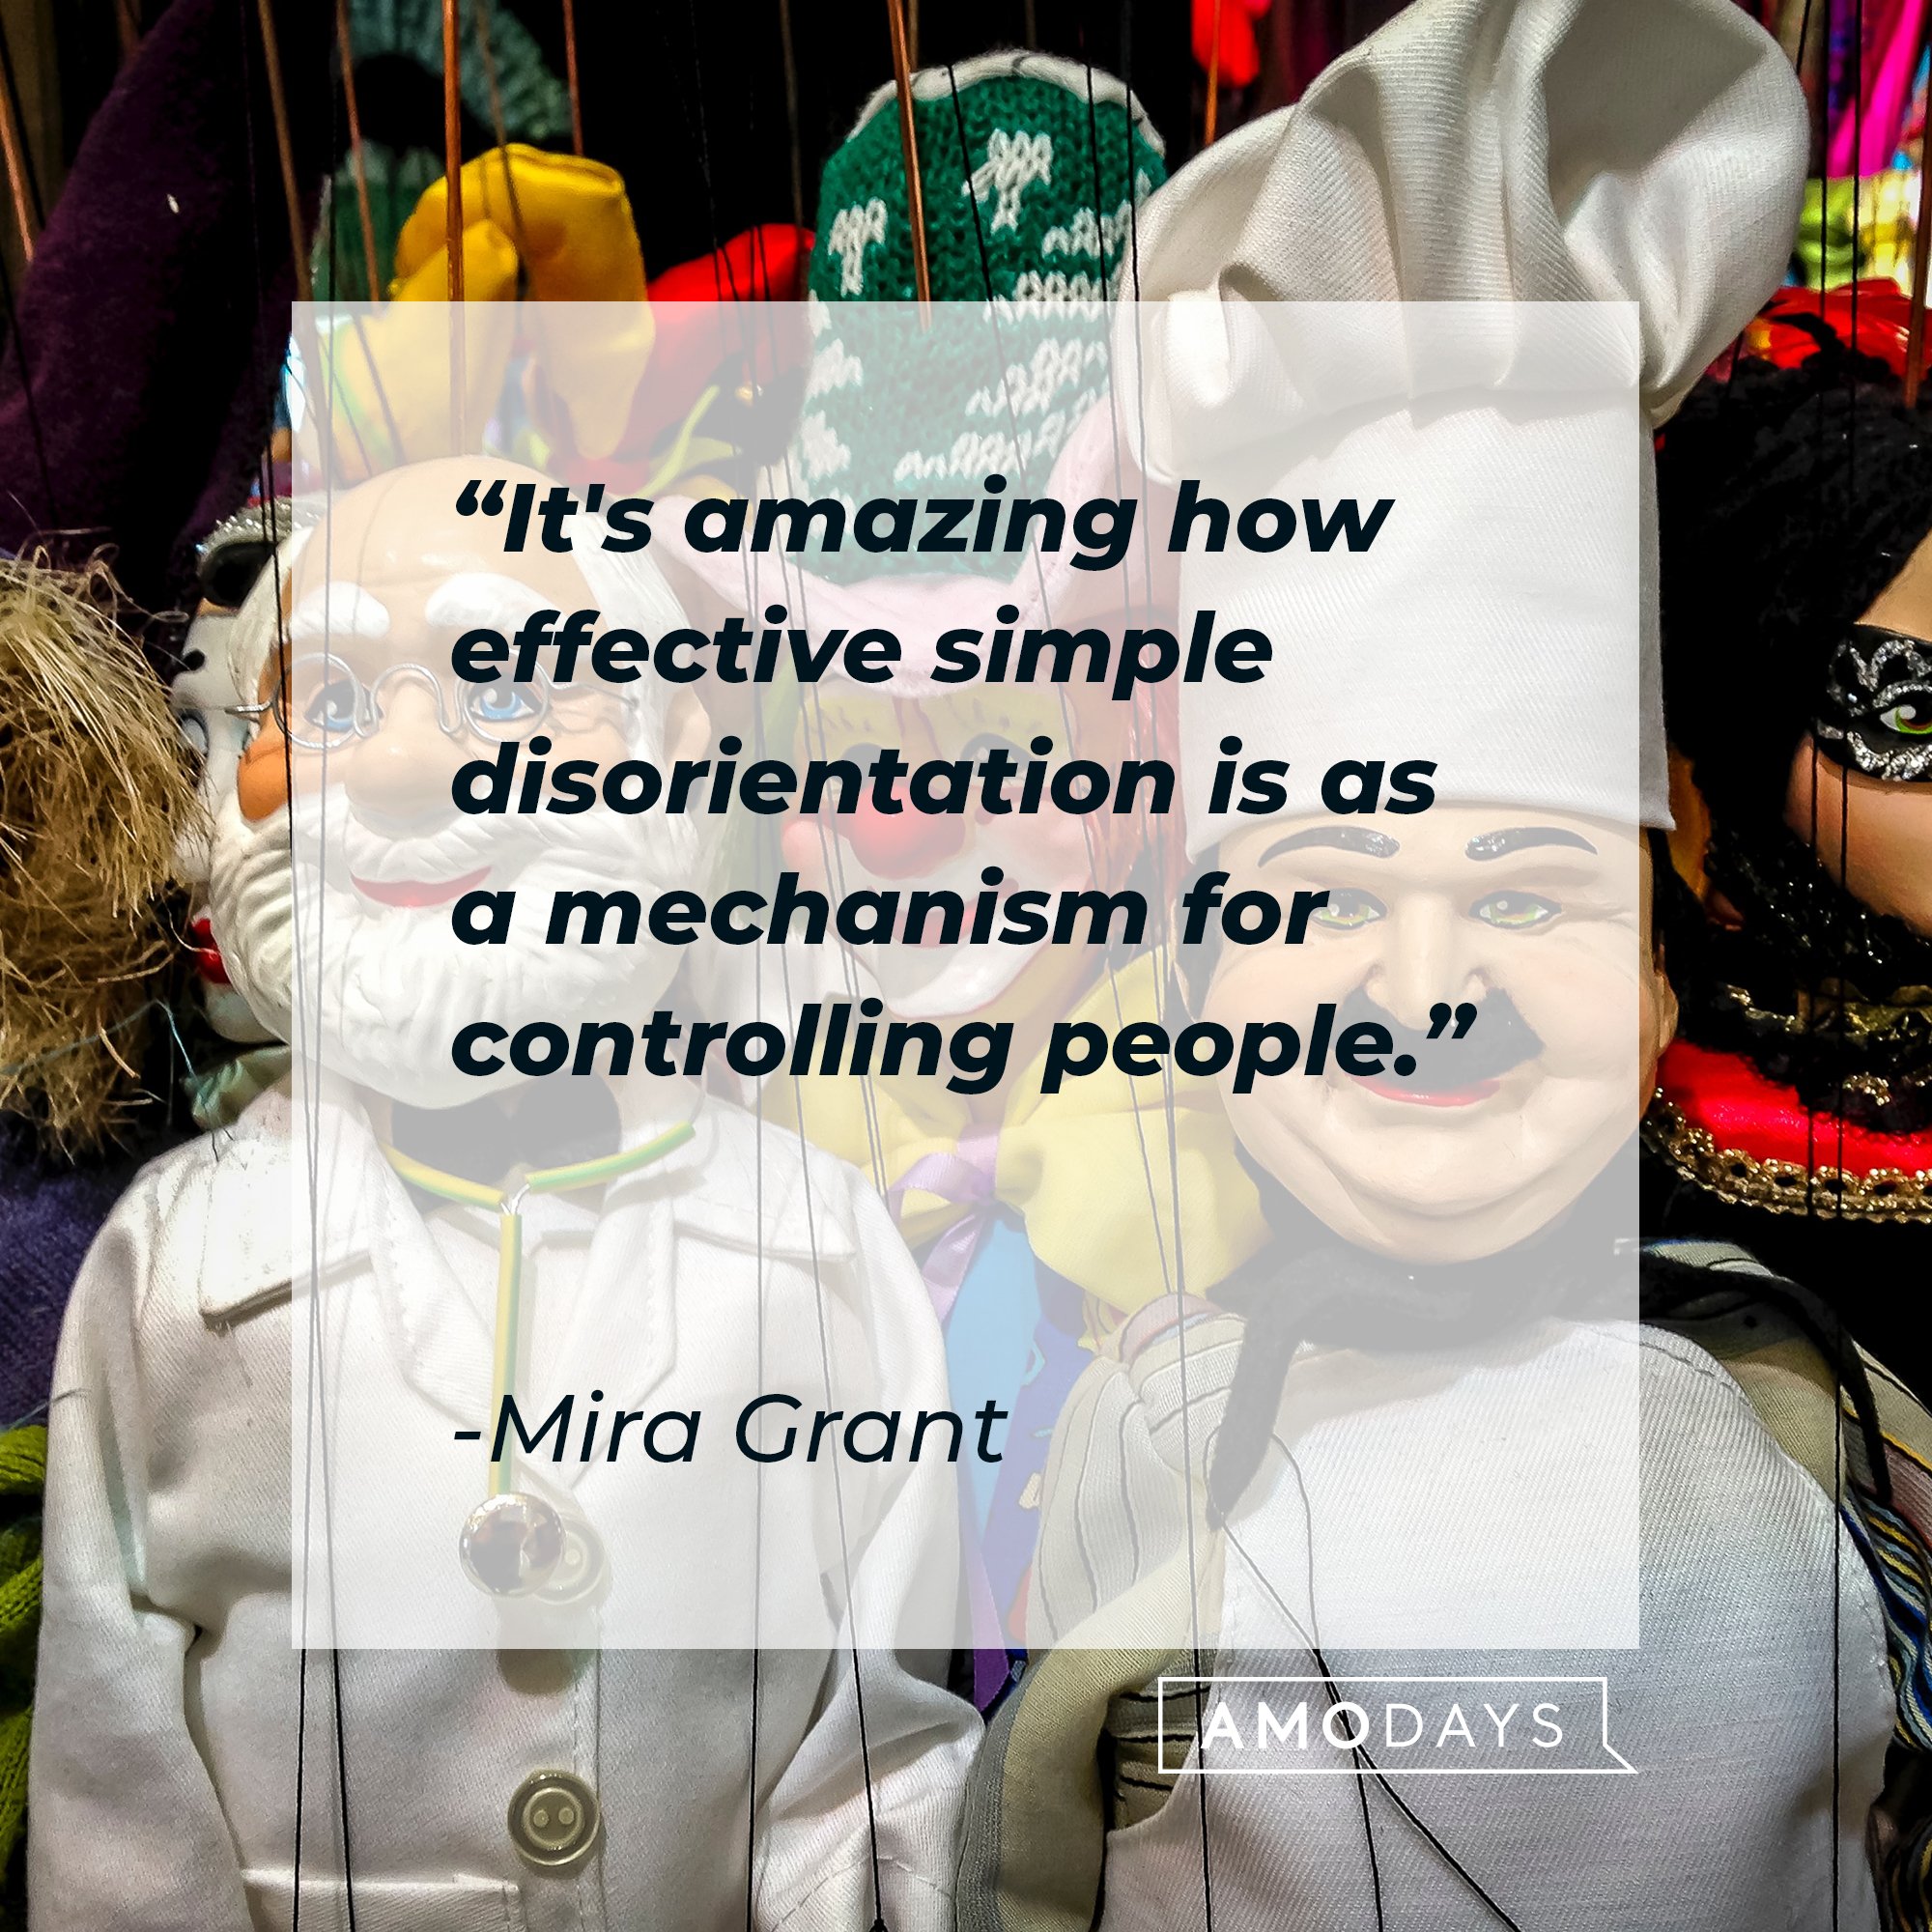 Mira Grant's quote: "It's amazing how effective simple disorientation is as a mechanism for controlling people." | Image: AmoDays